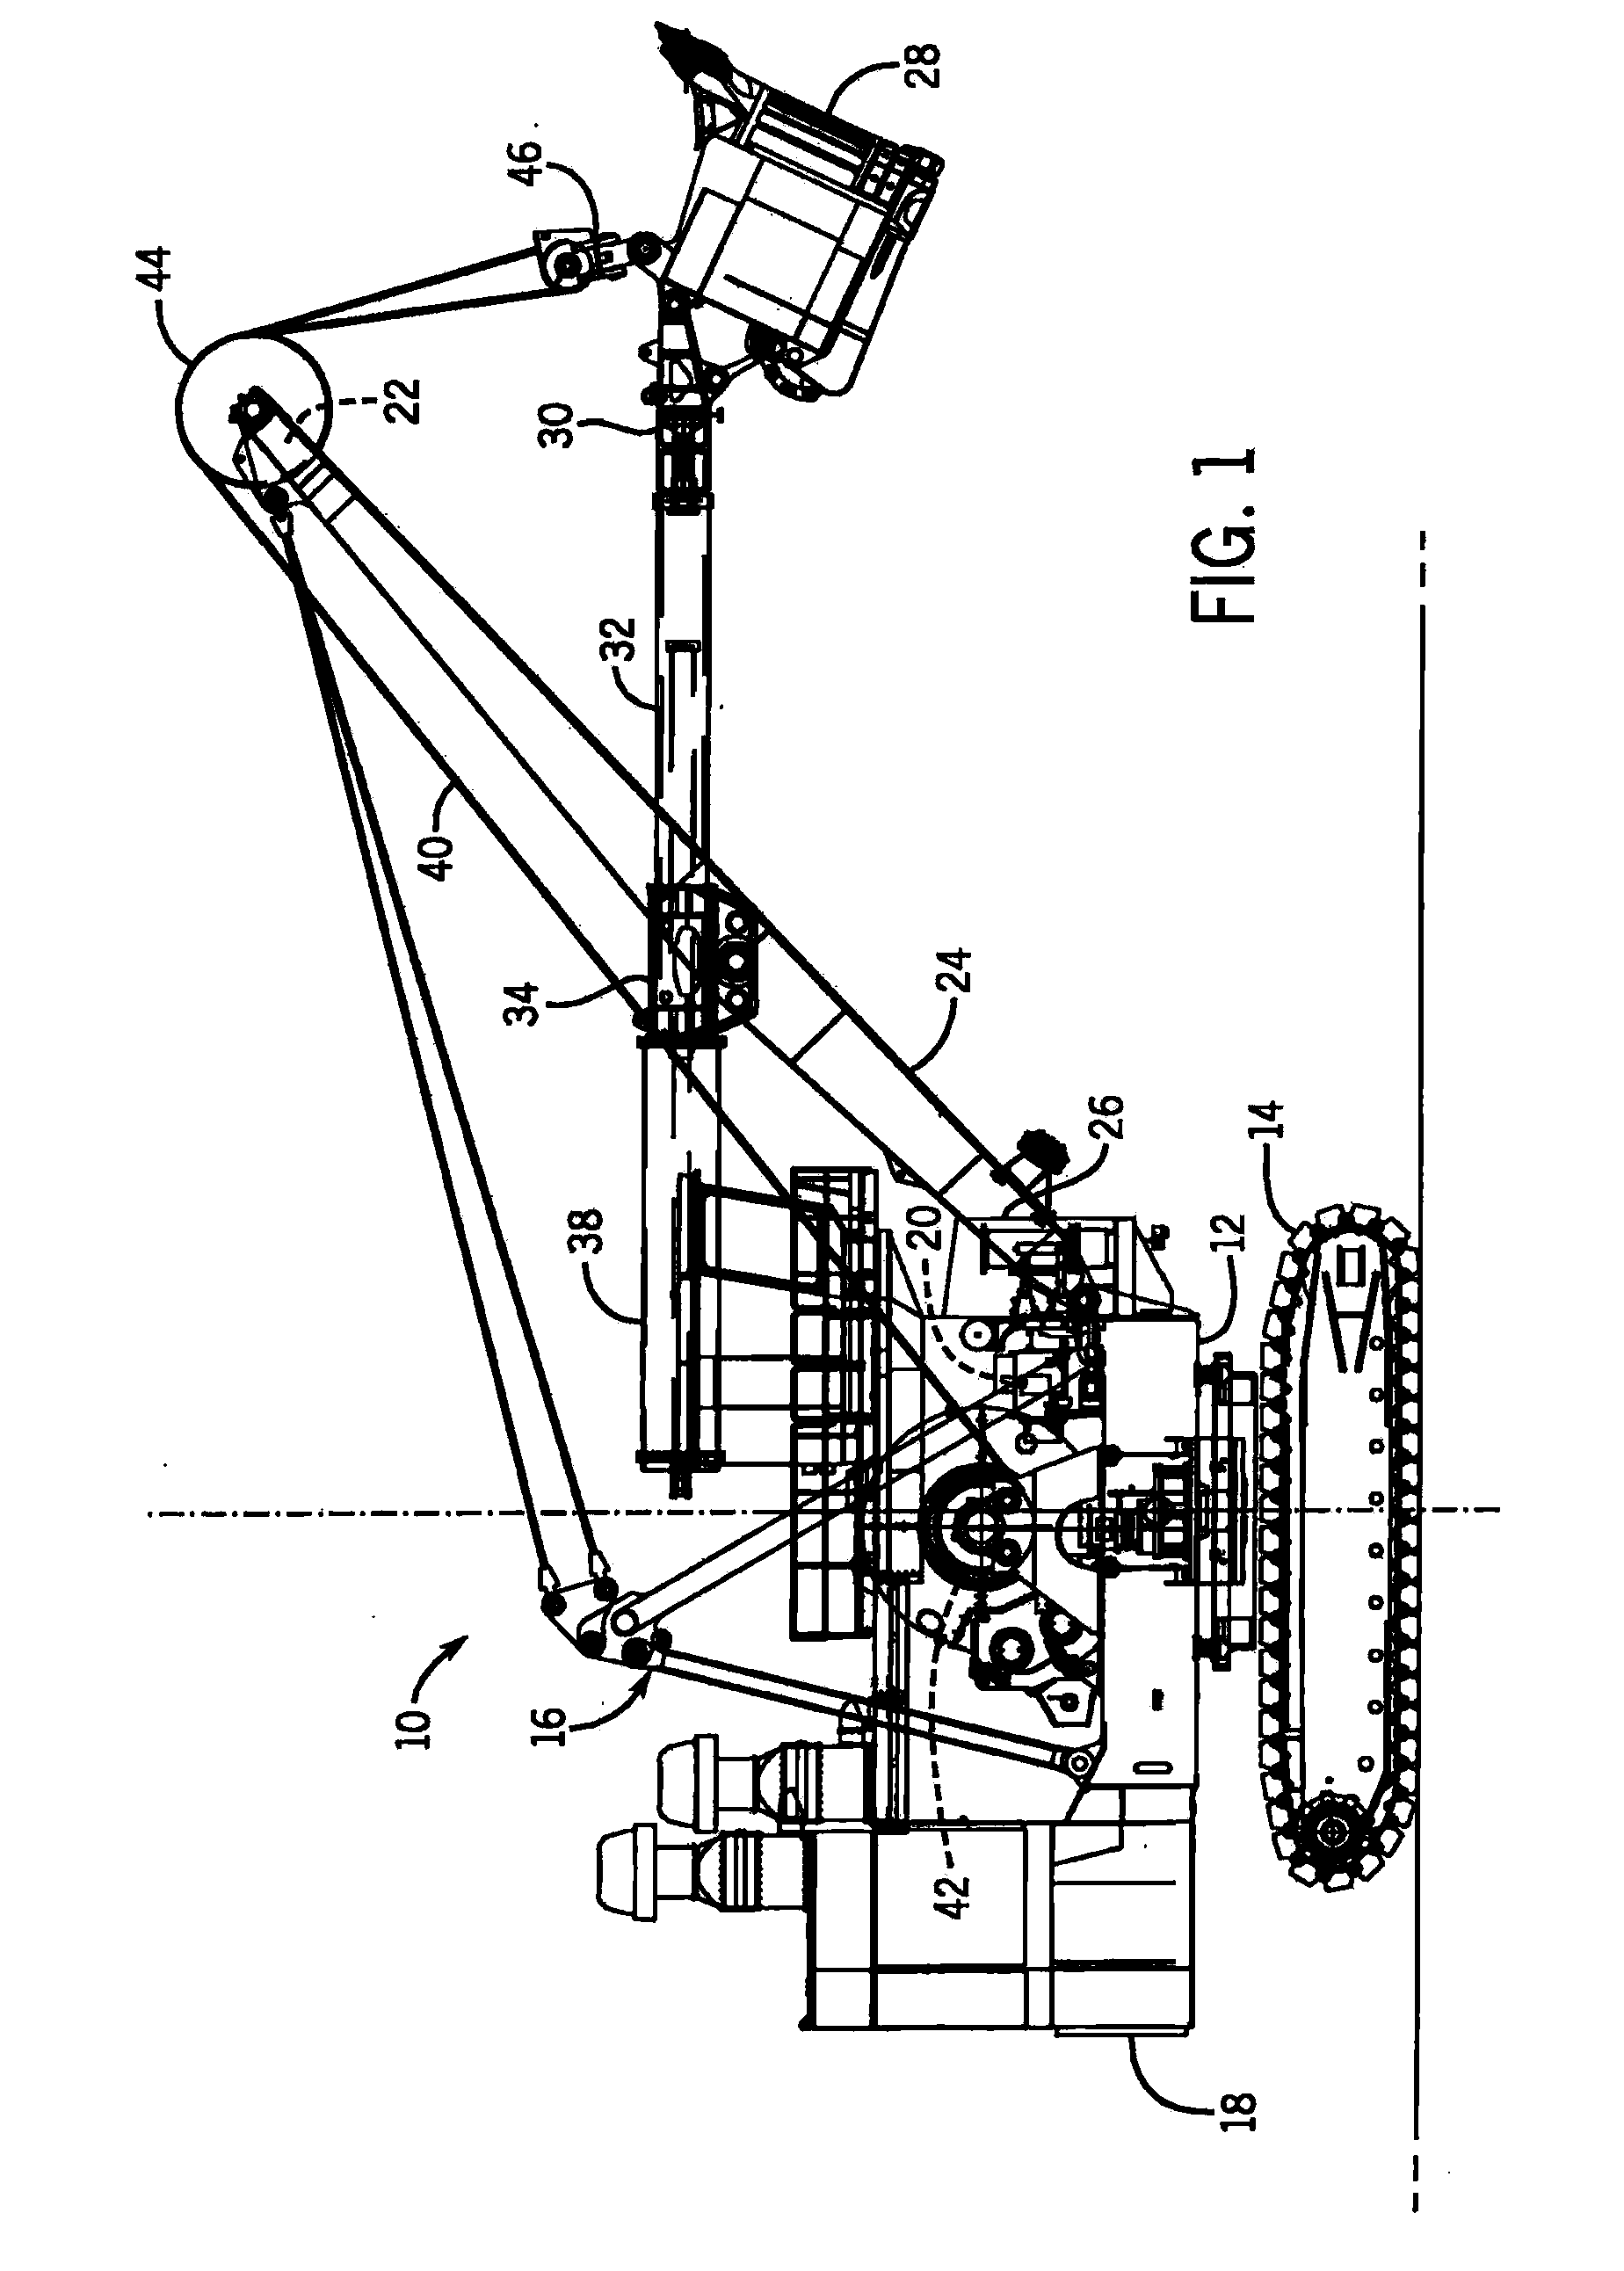 Hydraulic crowd system for electric mining shovel